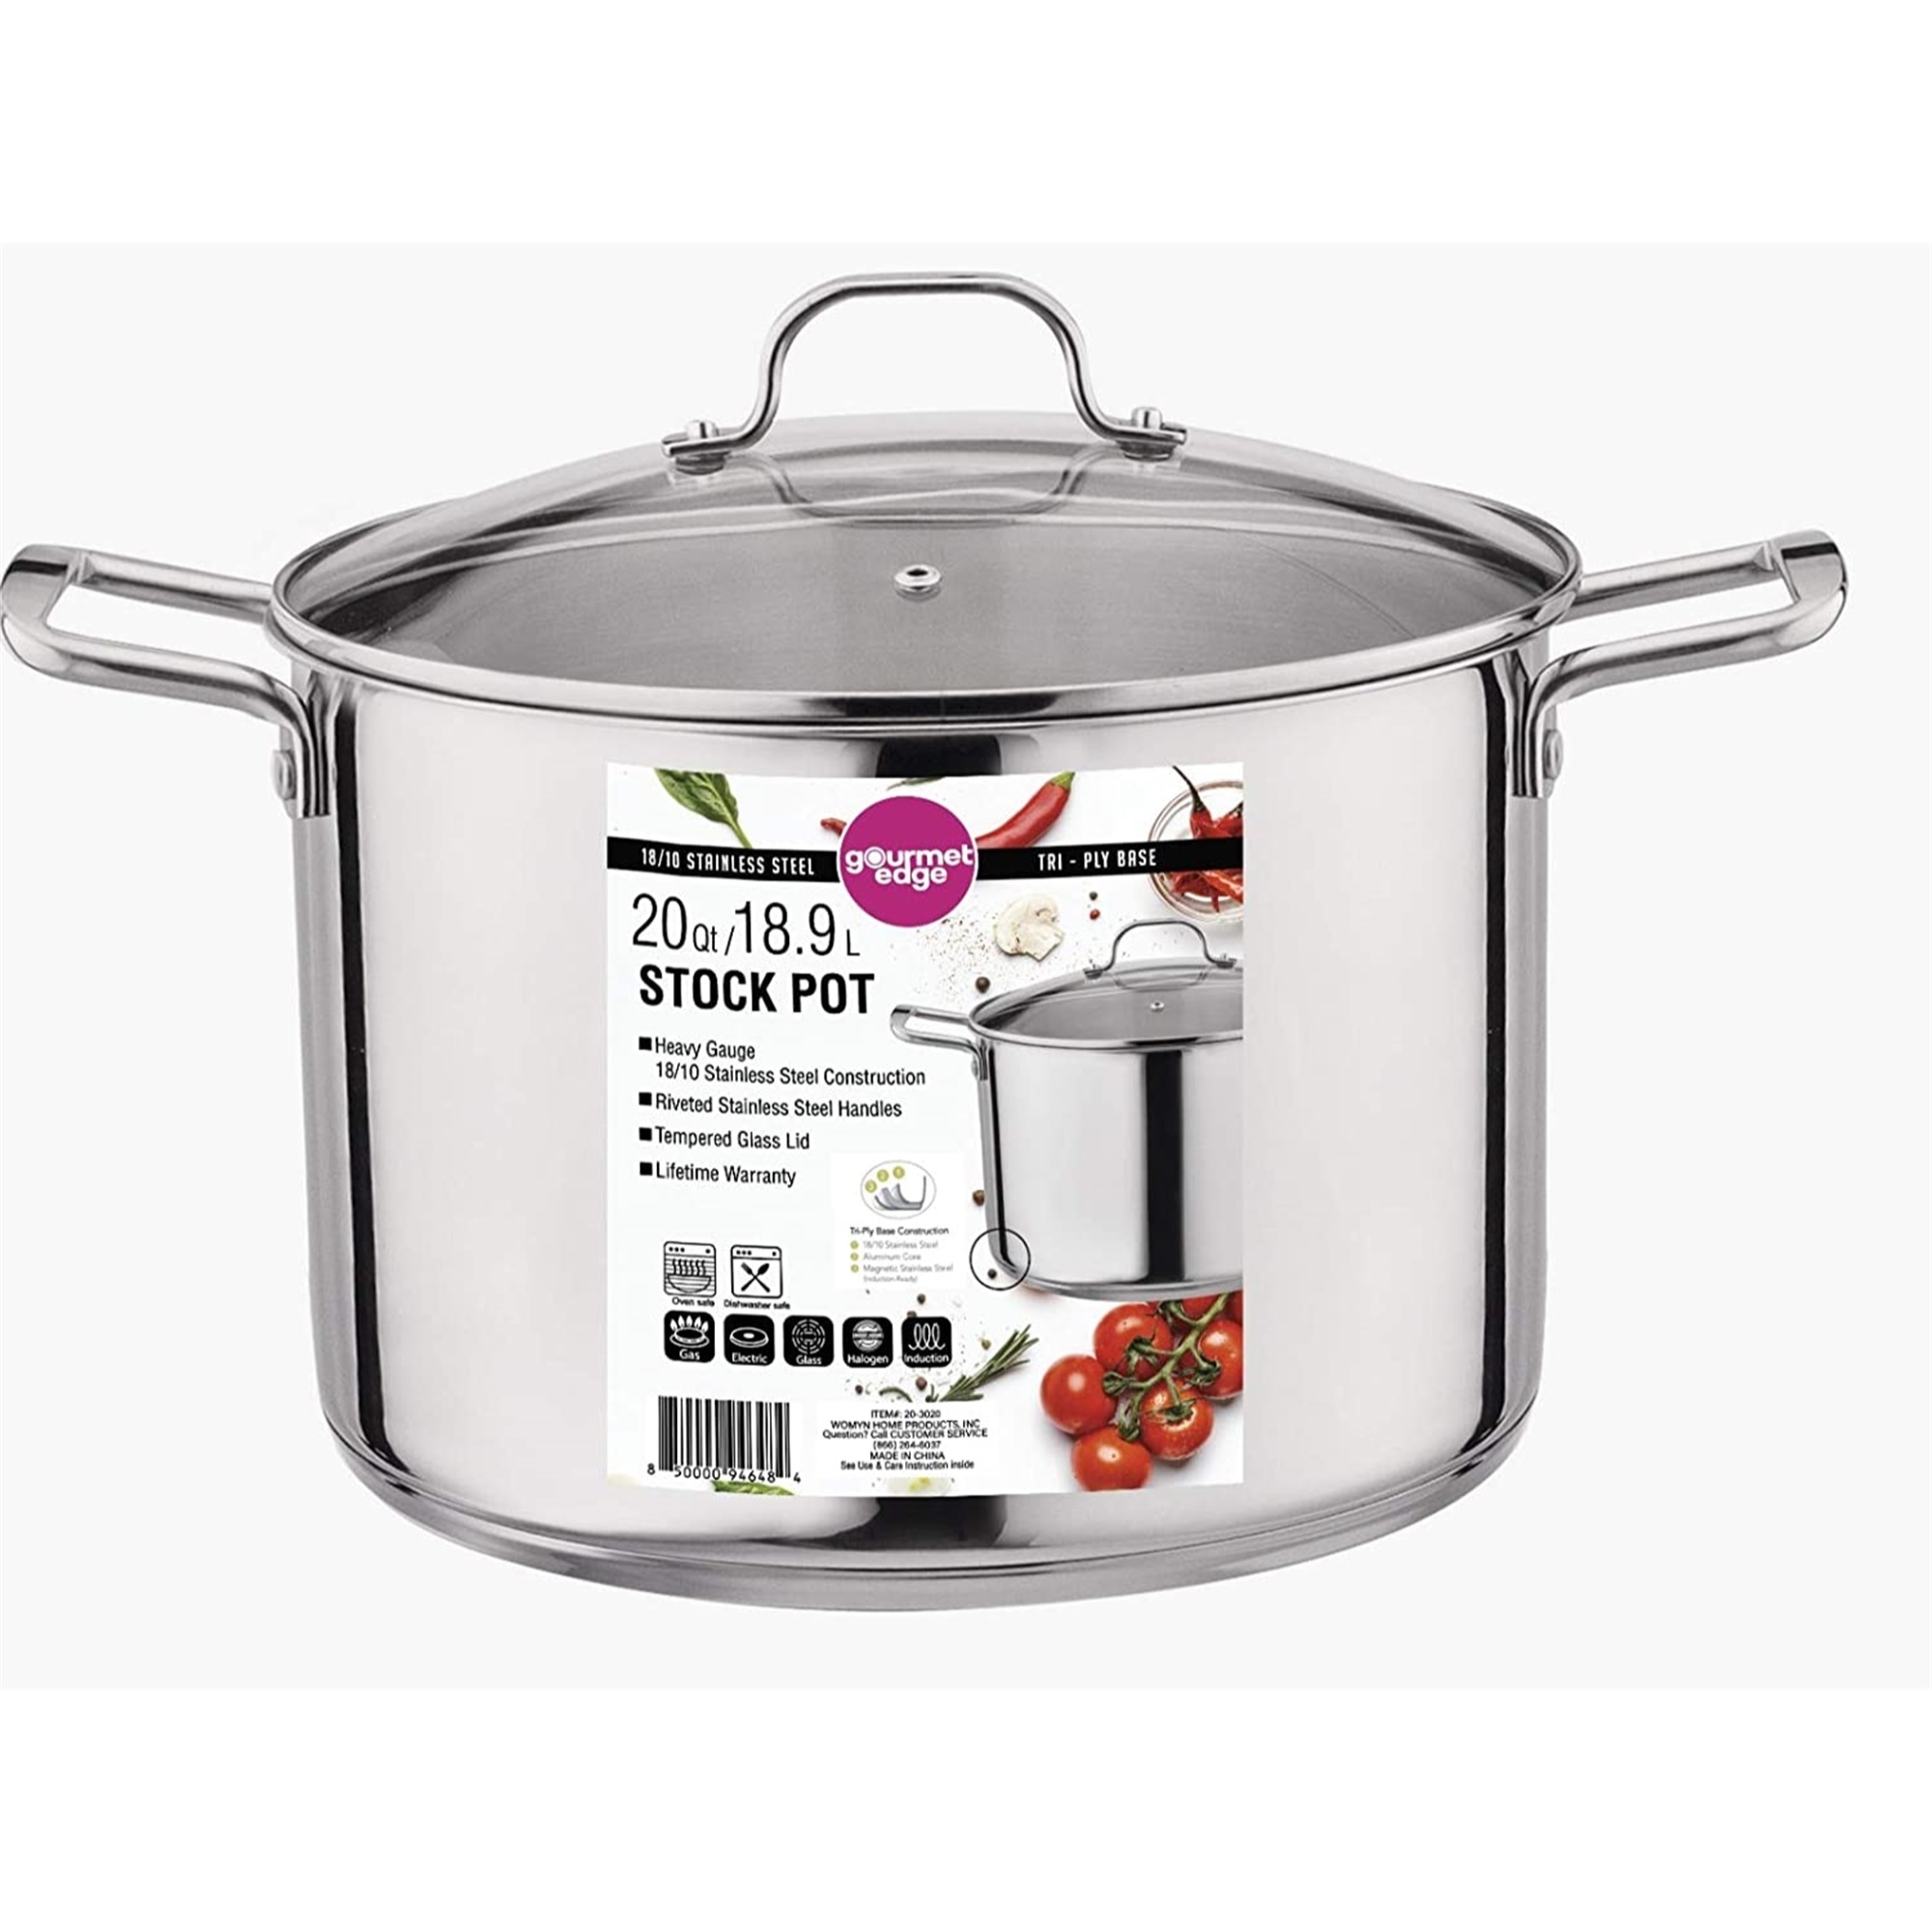 Gourmet Edge Stock Pot - Stainless Steel Cooking Pot with Lid, Silver- 20  Quart